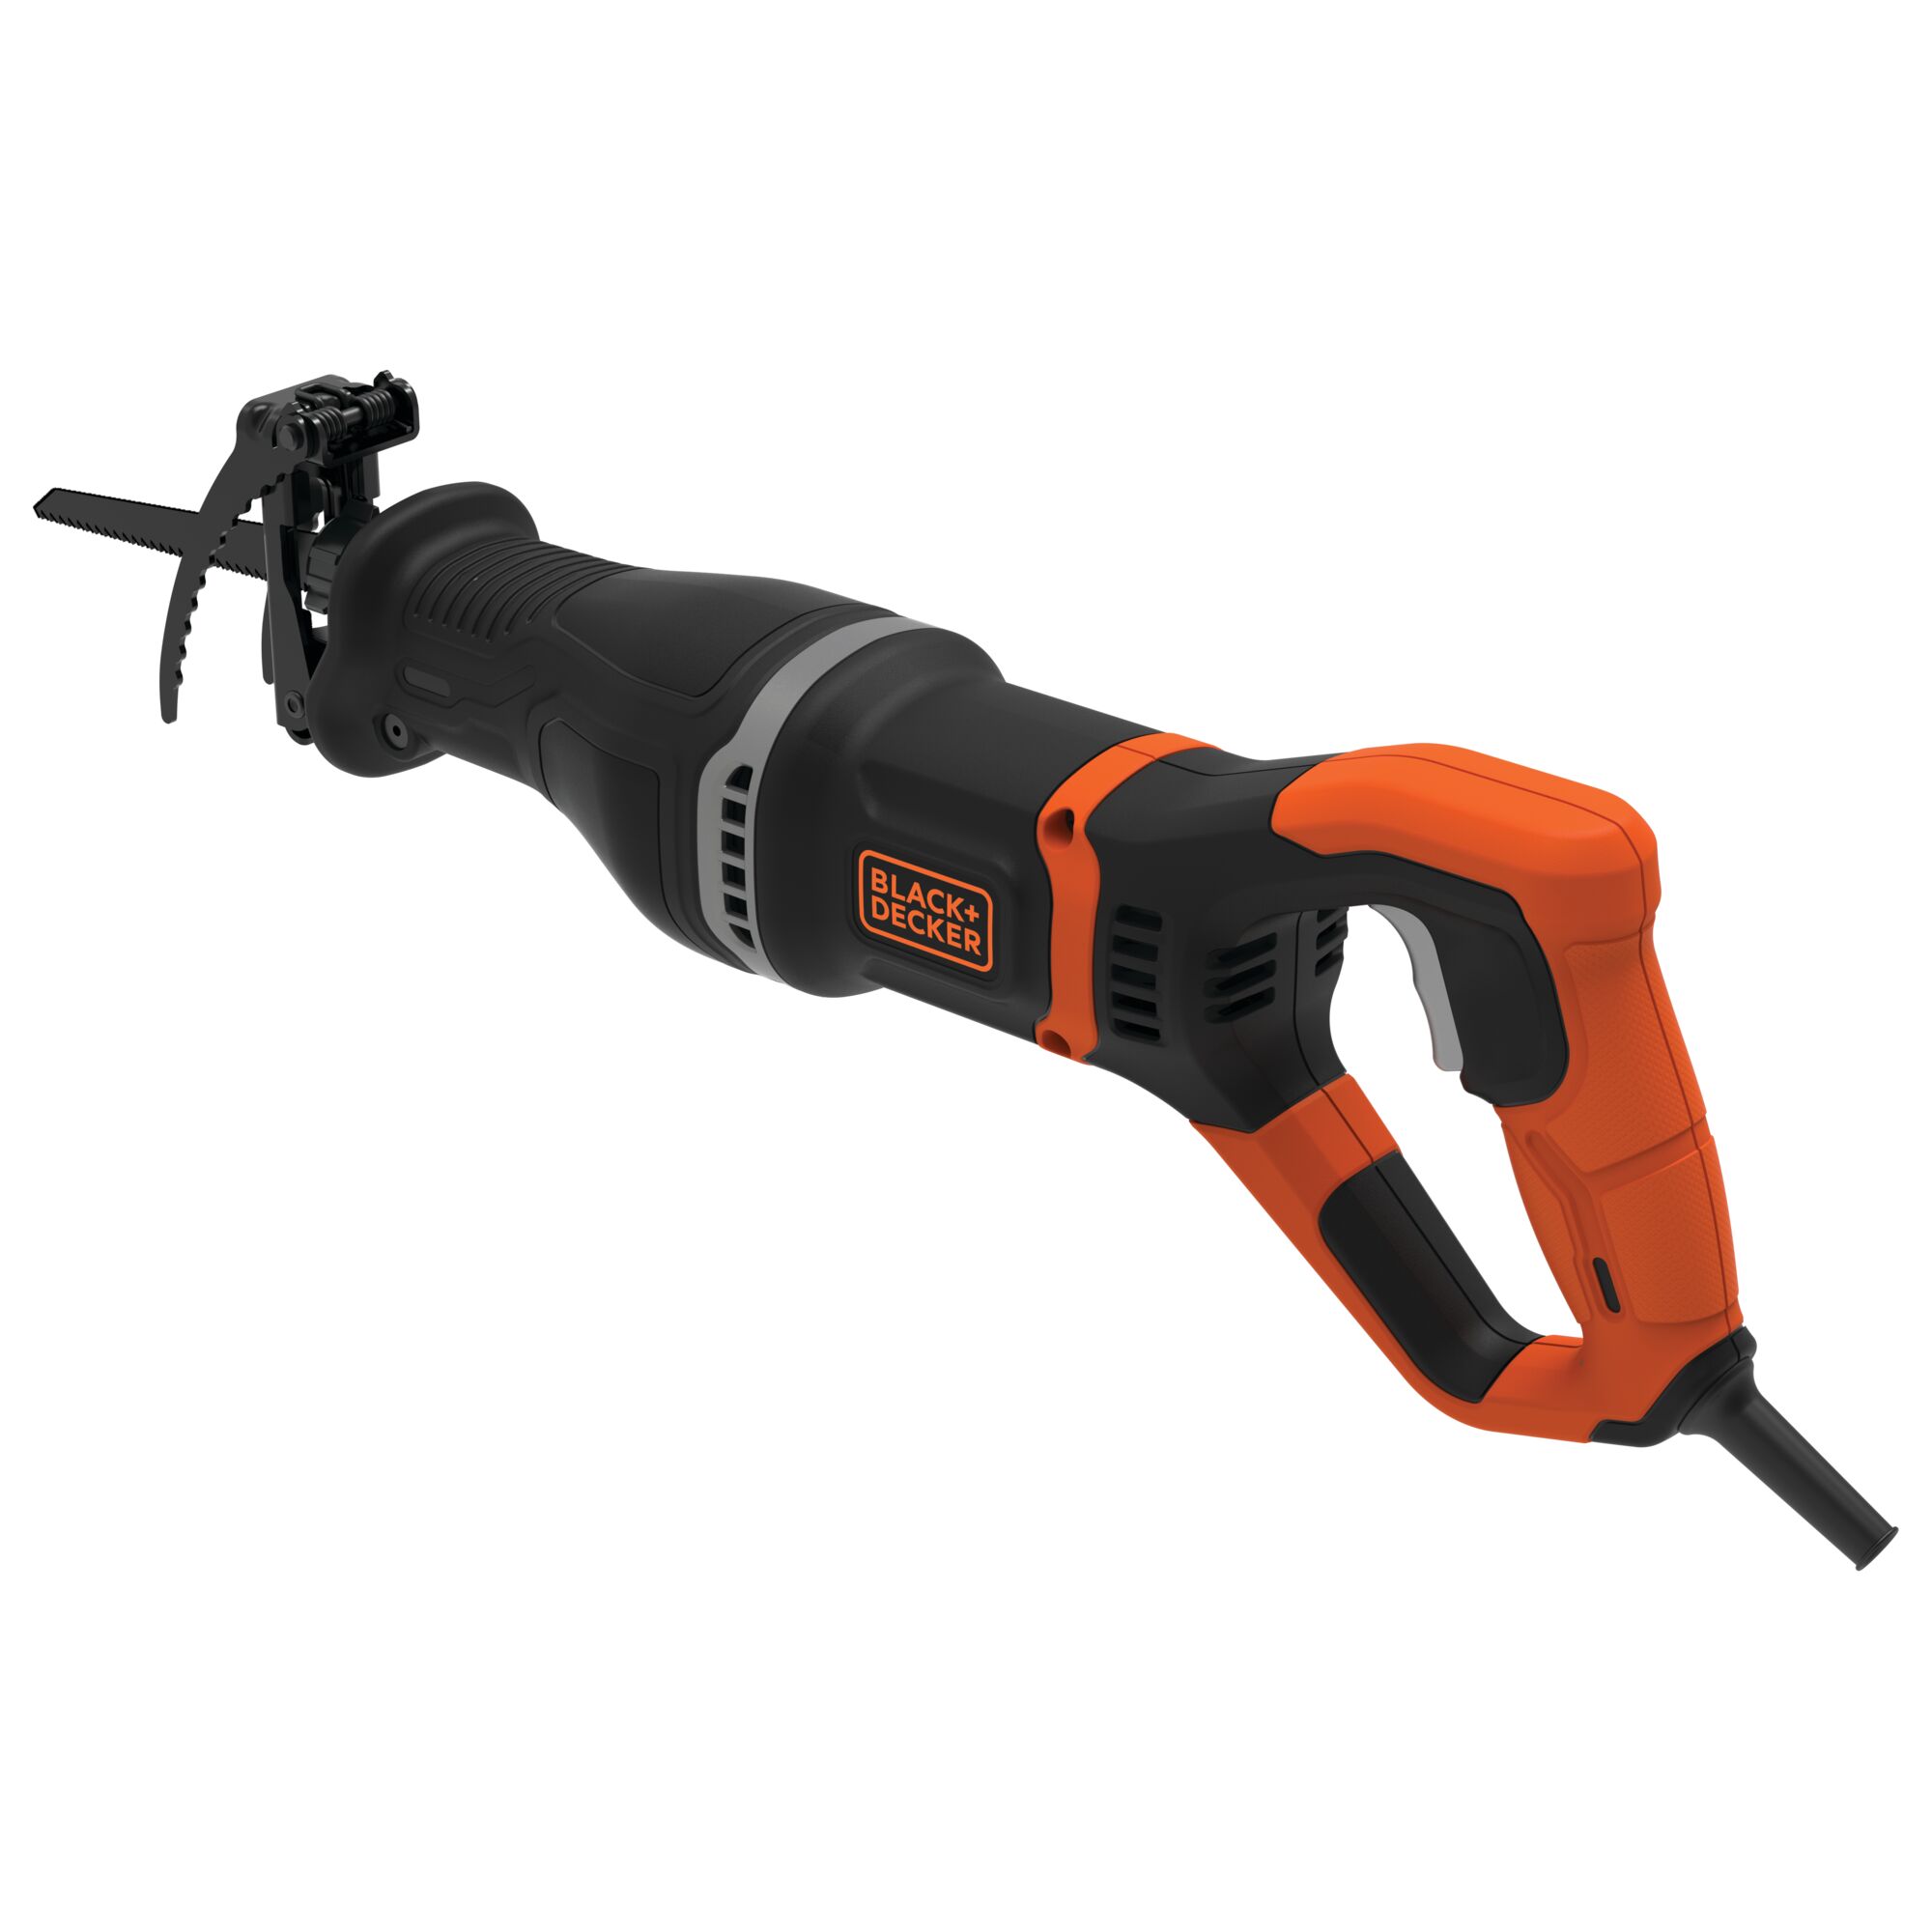 Black And Decker Reciprocating Saw Review: A Good Sawzall?